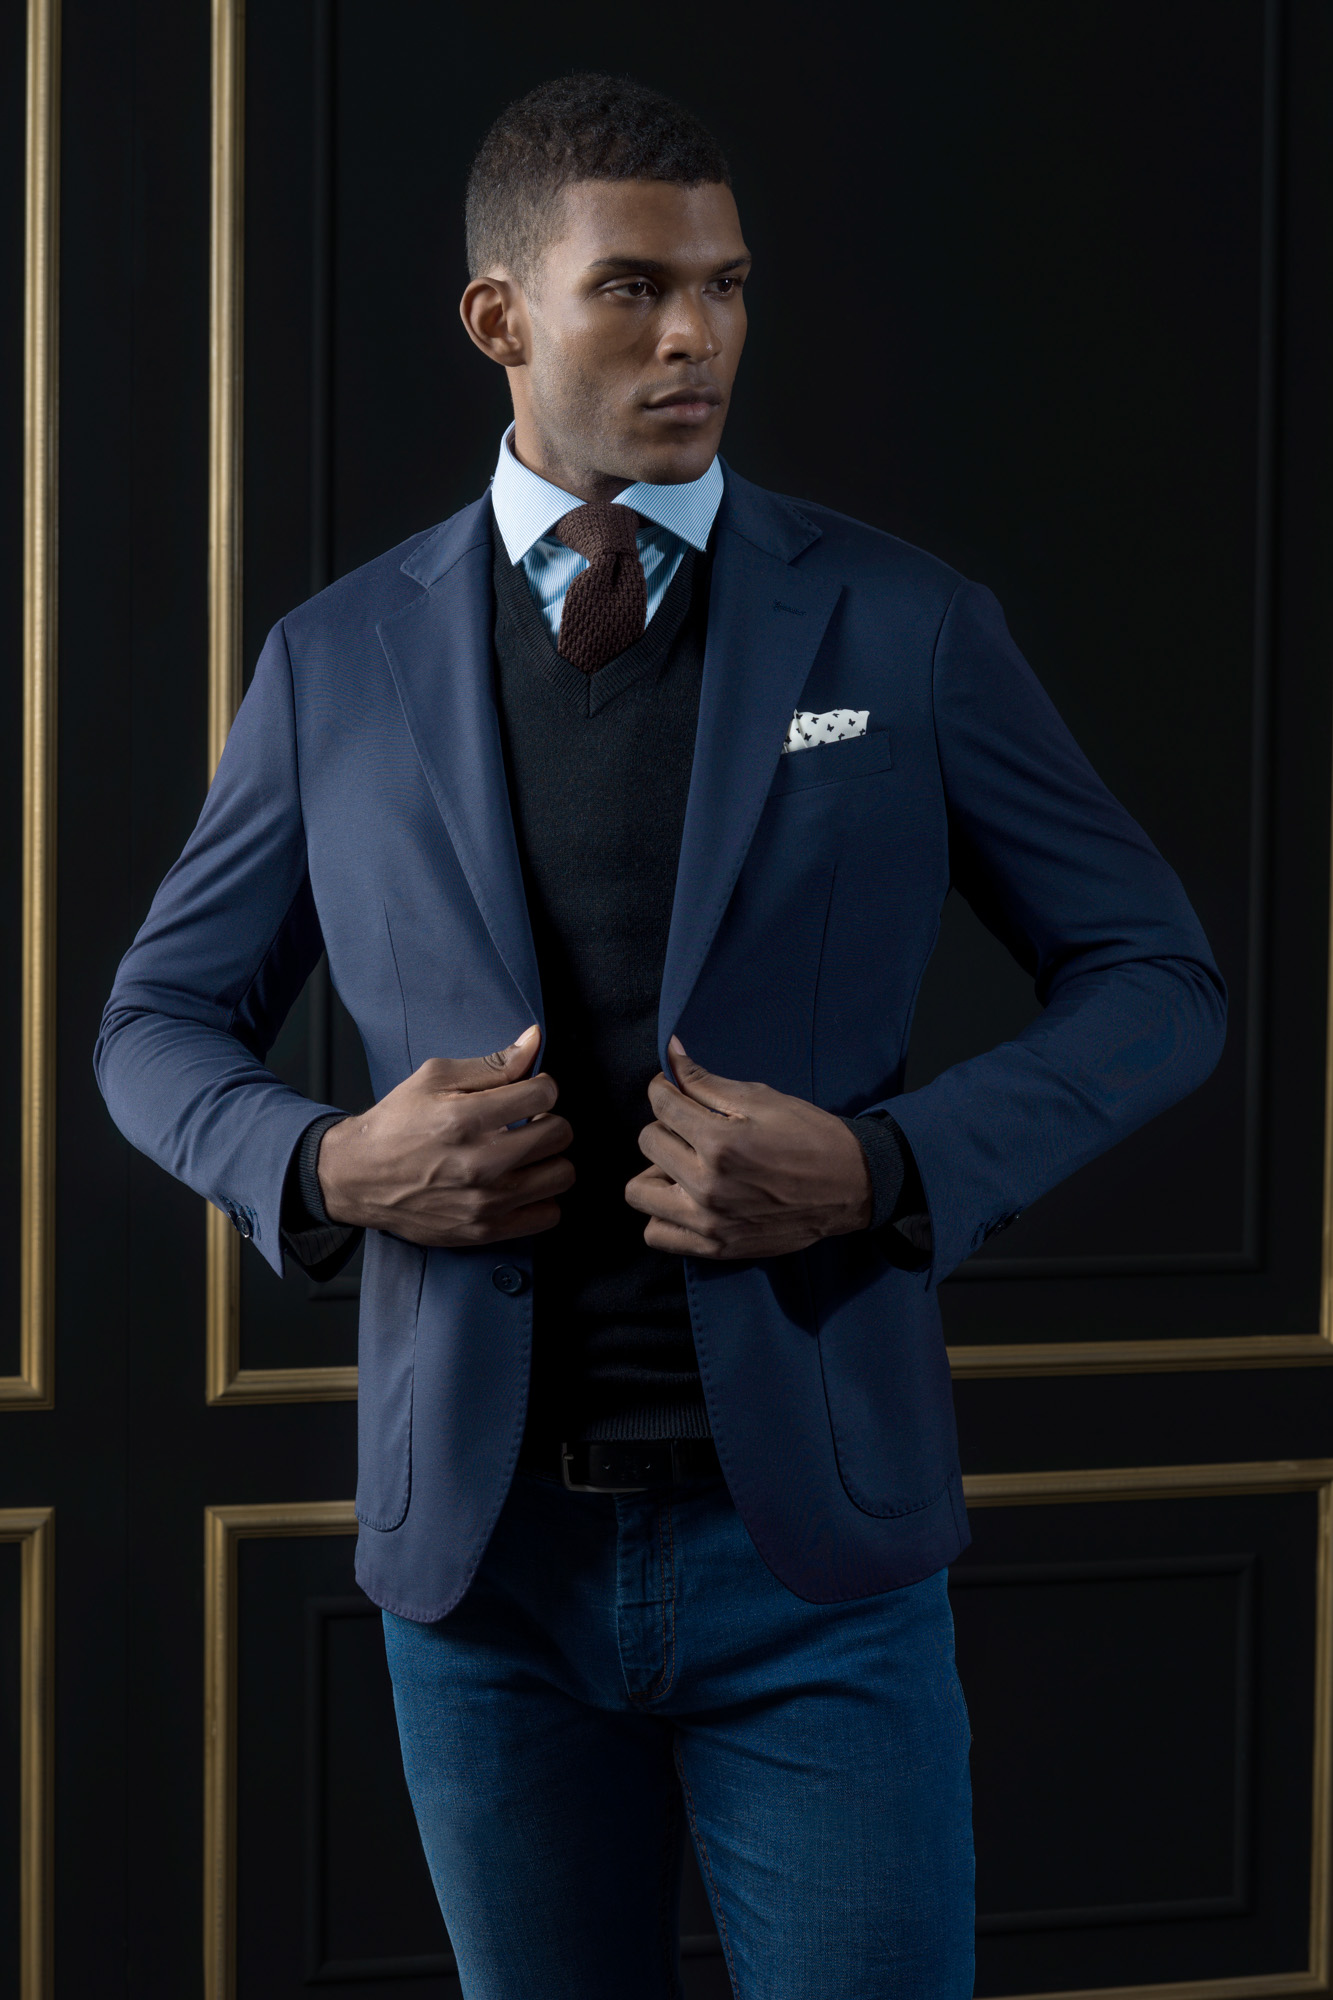 Single breasted blazer with classic lapel image number null